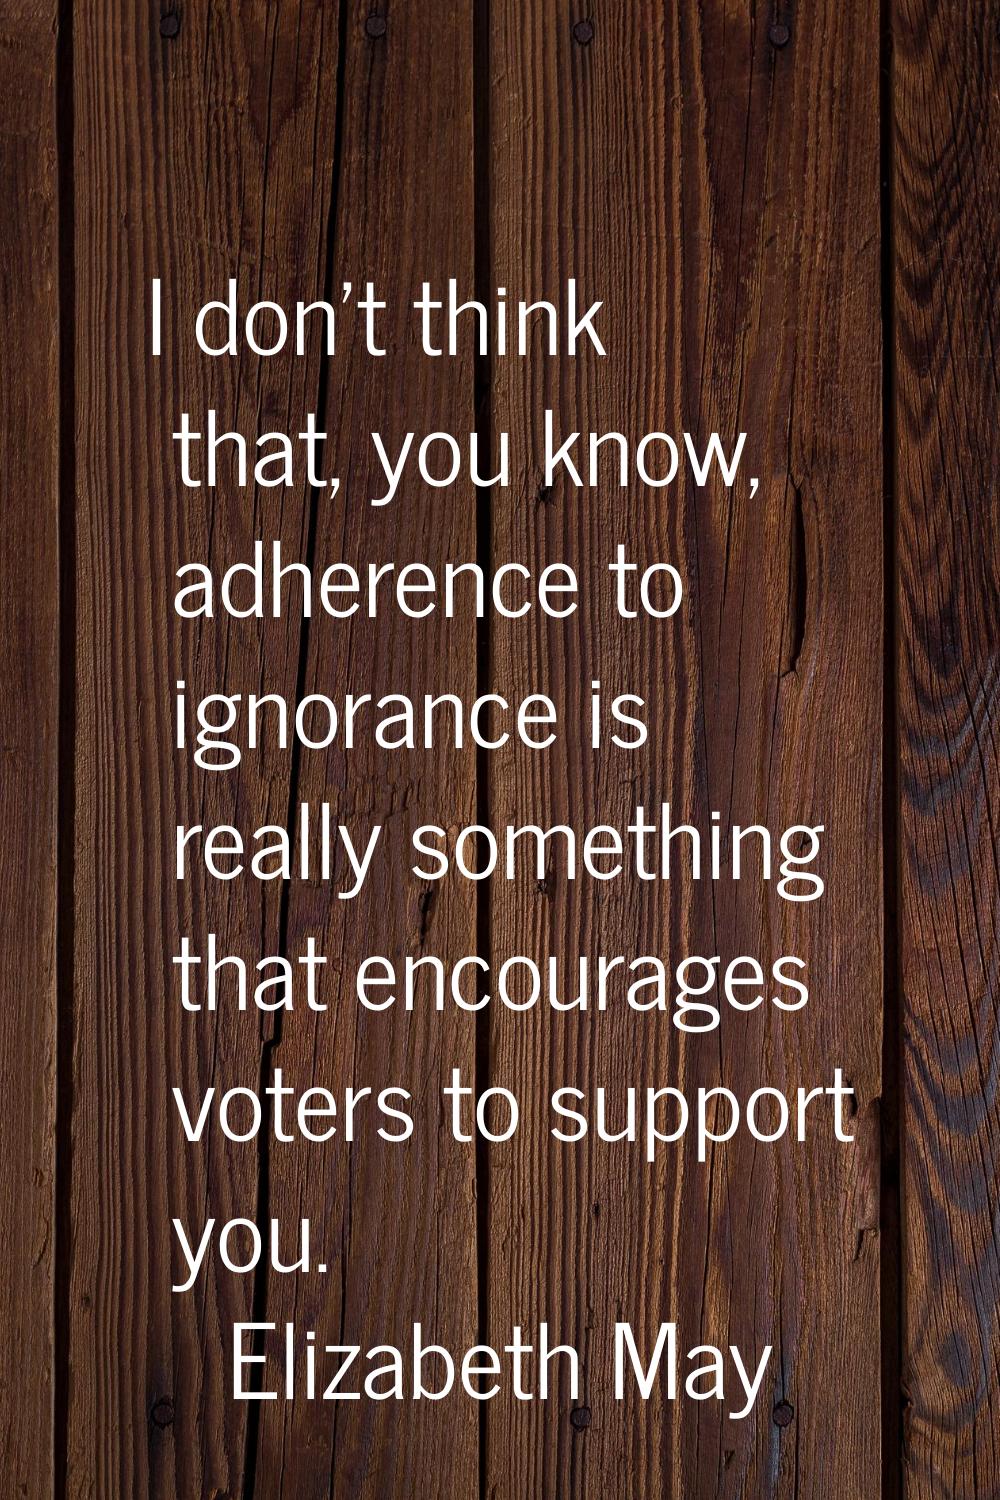 I don't think that, you know, adherence to ignorance is really something that encourages voters to 